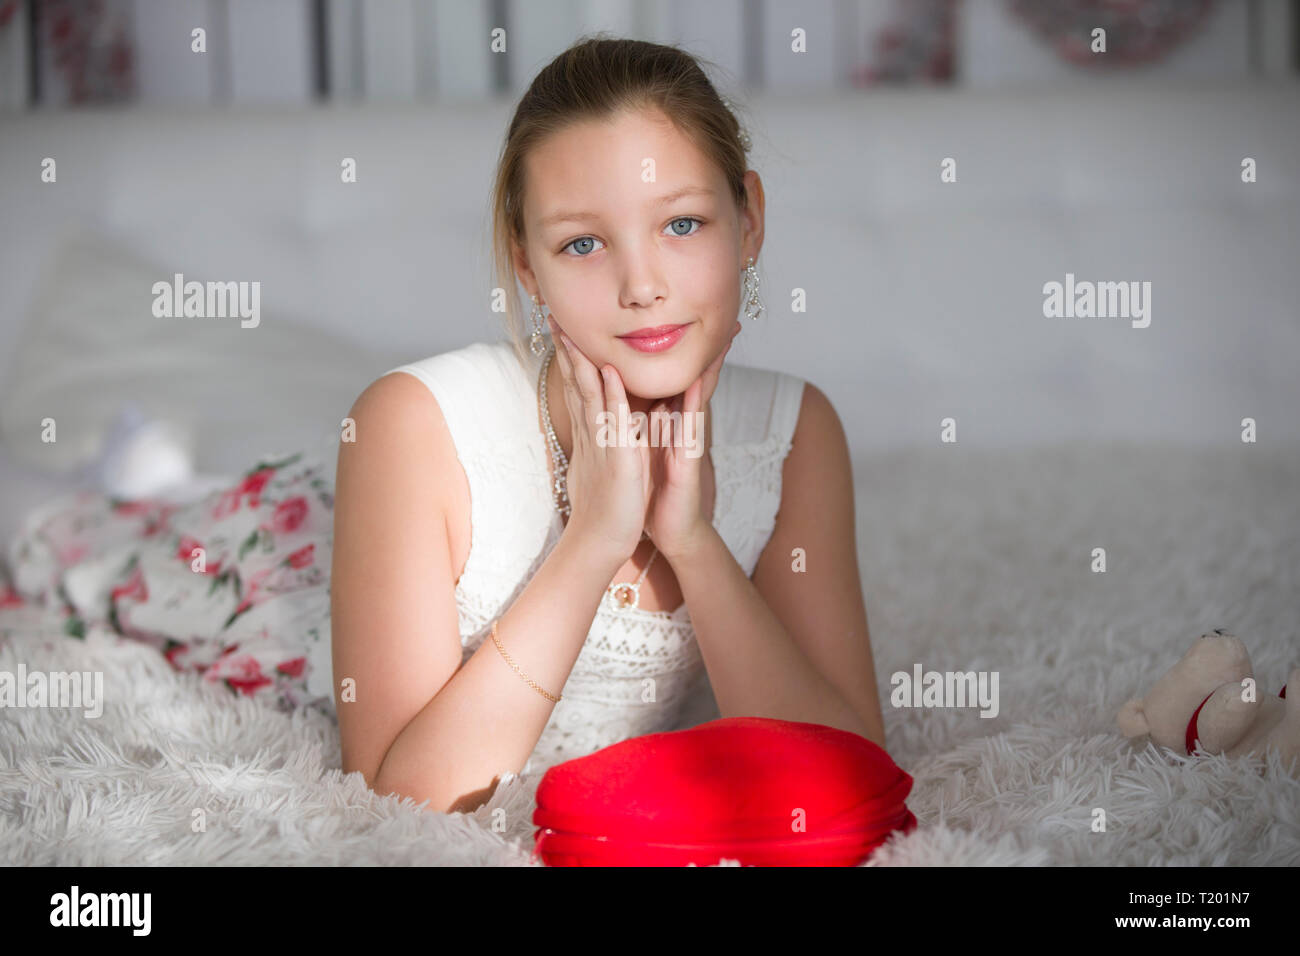 Very Young Teen Girl On The Bed